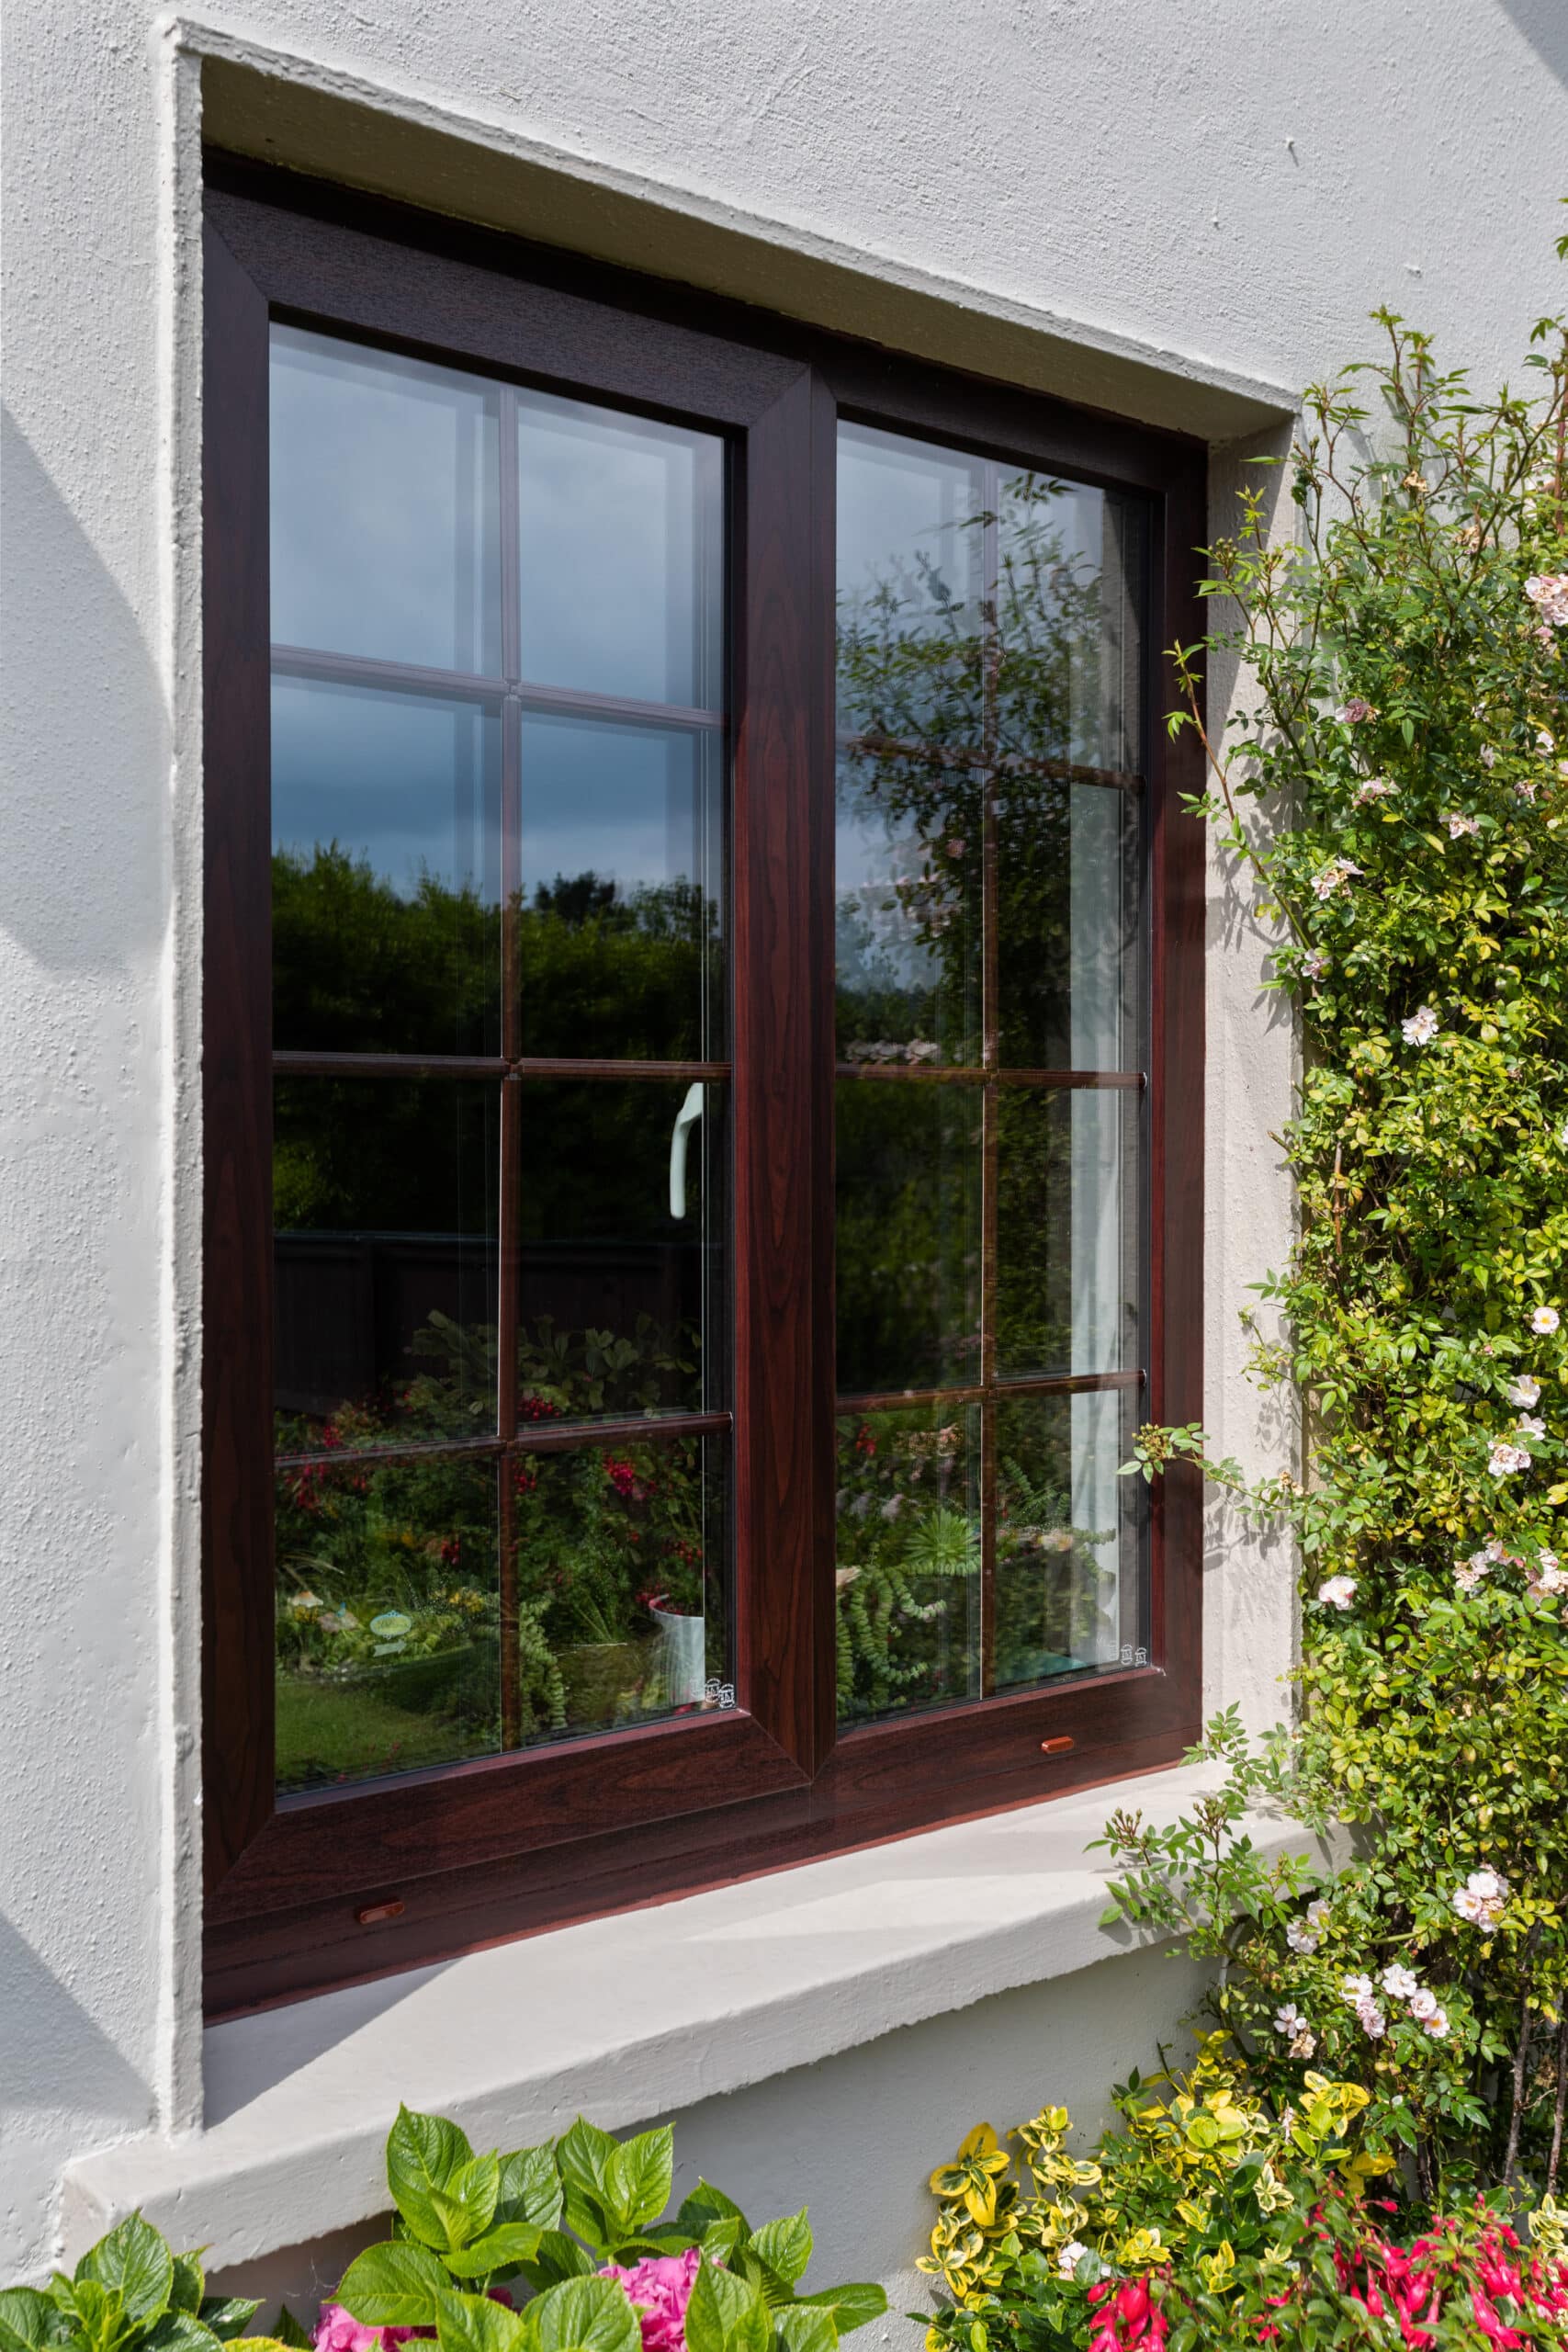 Finesse Frame windows, Rosewood